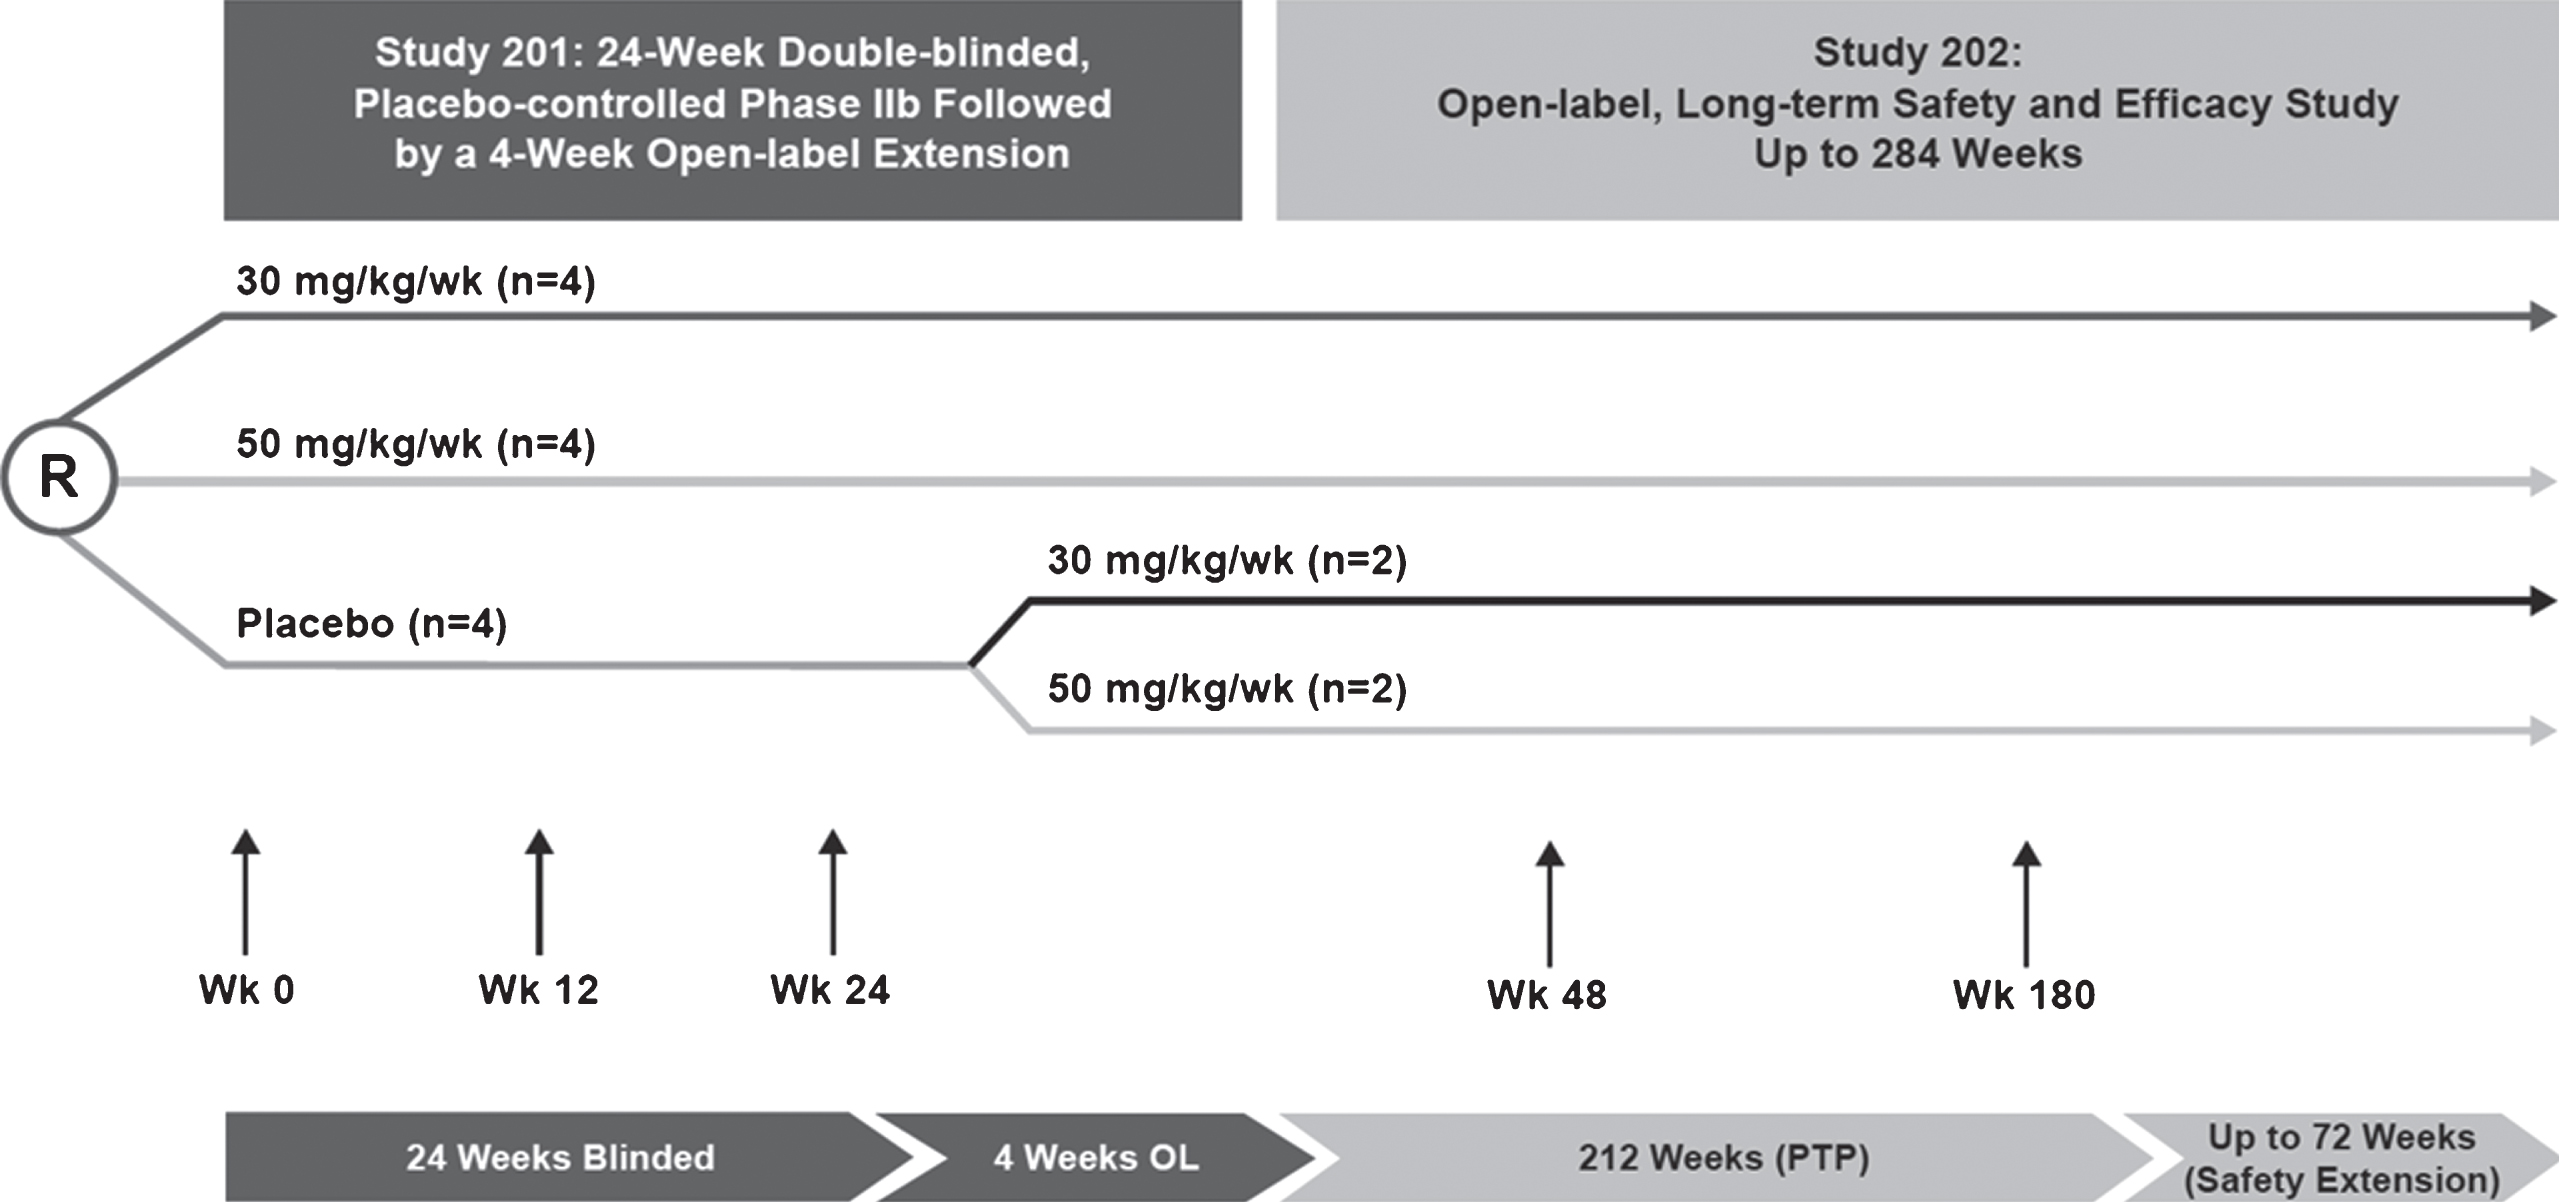 Study design for eteplirsen studies 201/202. Study 201 was a 24-week, double-blind, placebo-controlled study that randomized 12 patients to receive placebo or eteplirsen (30 or 50 mg/kg/wk). At week 25, patients originally randomized to eteplirsen treatment continued with the same dosage in study 202, an open-label extension study; patients originally randomized to receive placebo were randomized to eteplirsen 30 or 50 mg/kg. All patients were followed for 4 years. Respiratory function assessments included FVC% p as an exploratory endpoint. FVC% p, percent predicated forced vital capacity; OL, open-label; PTP, primary treatment period; R, randomized.